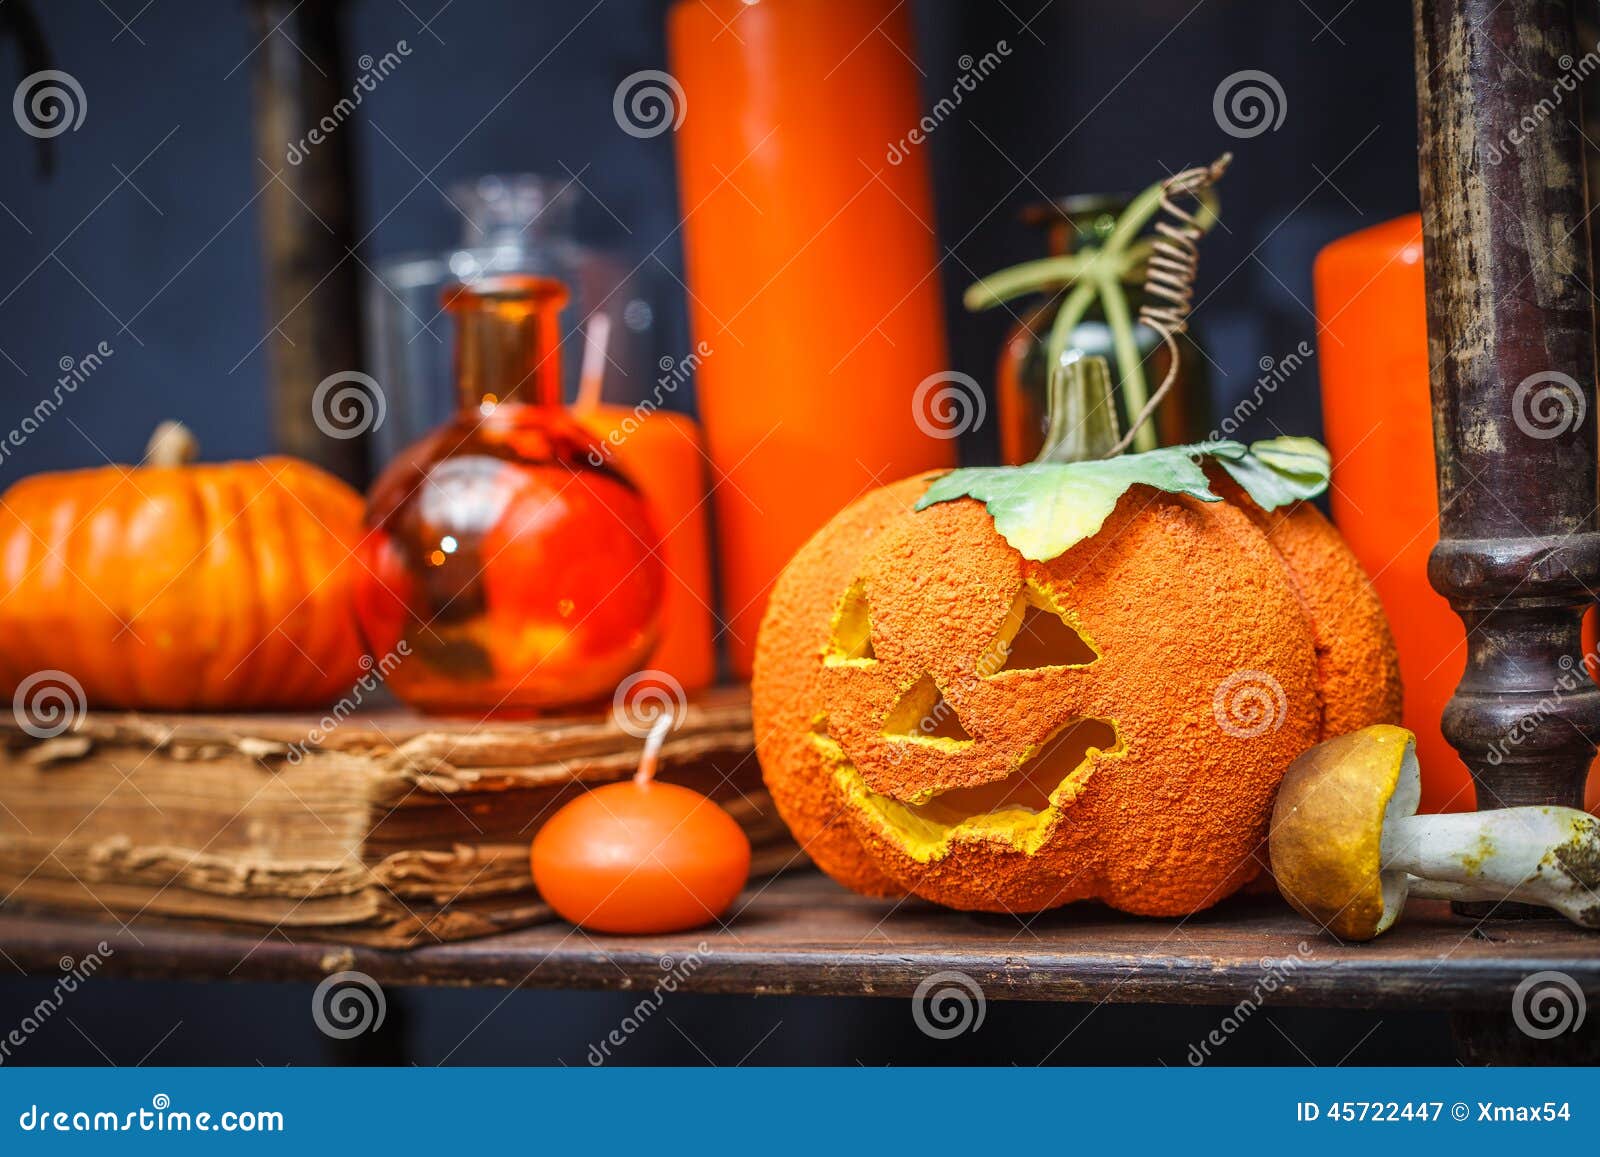 Set of Objects To Celebrate Halloween Stock Image - Image of ...